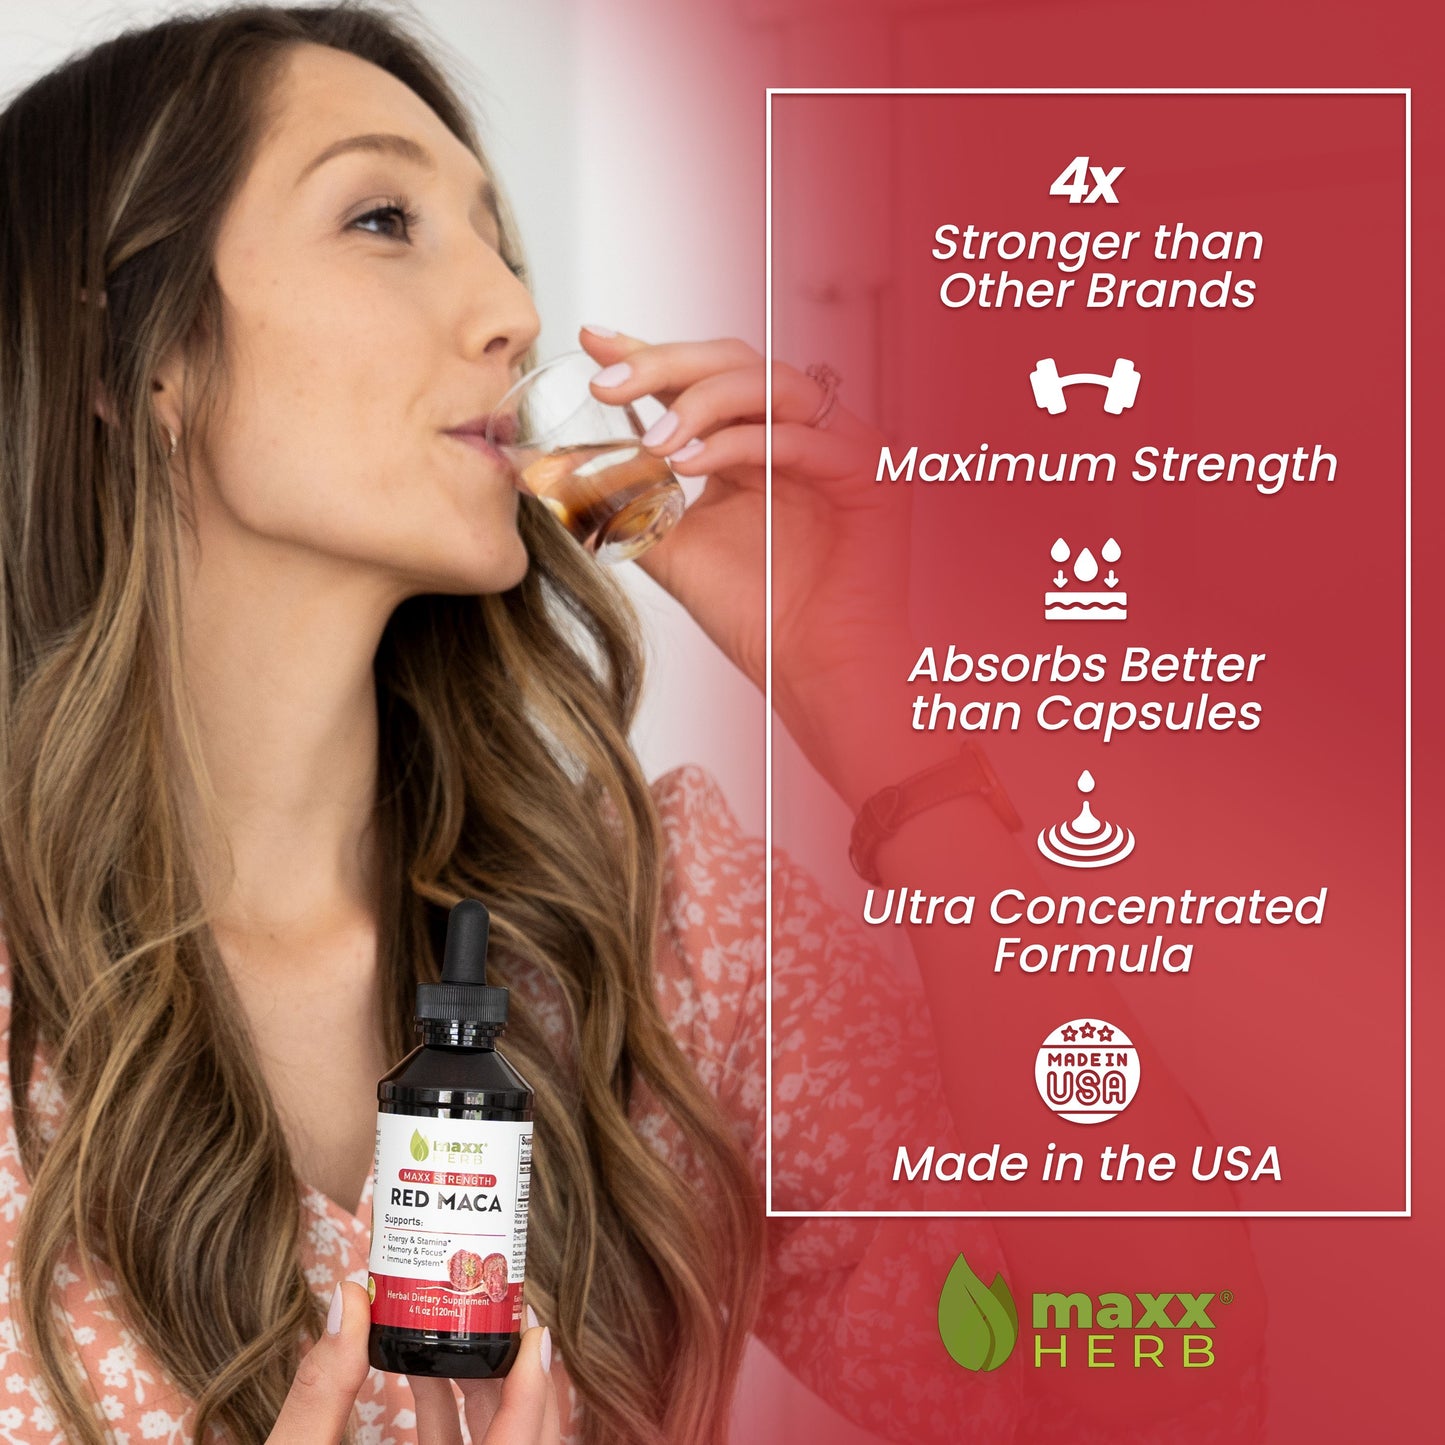 Red Maca Root Extract - 4oz (60 Servings)